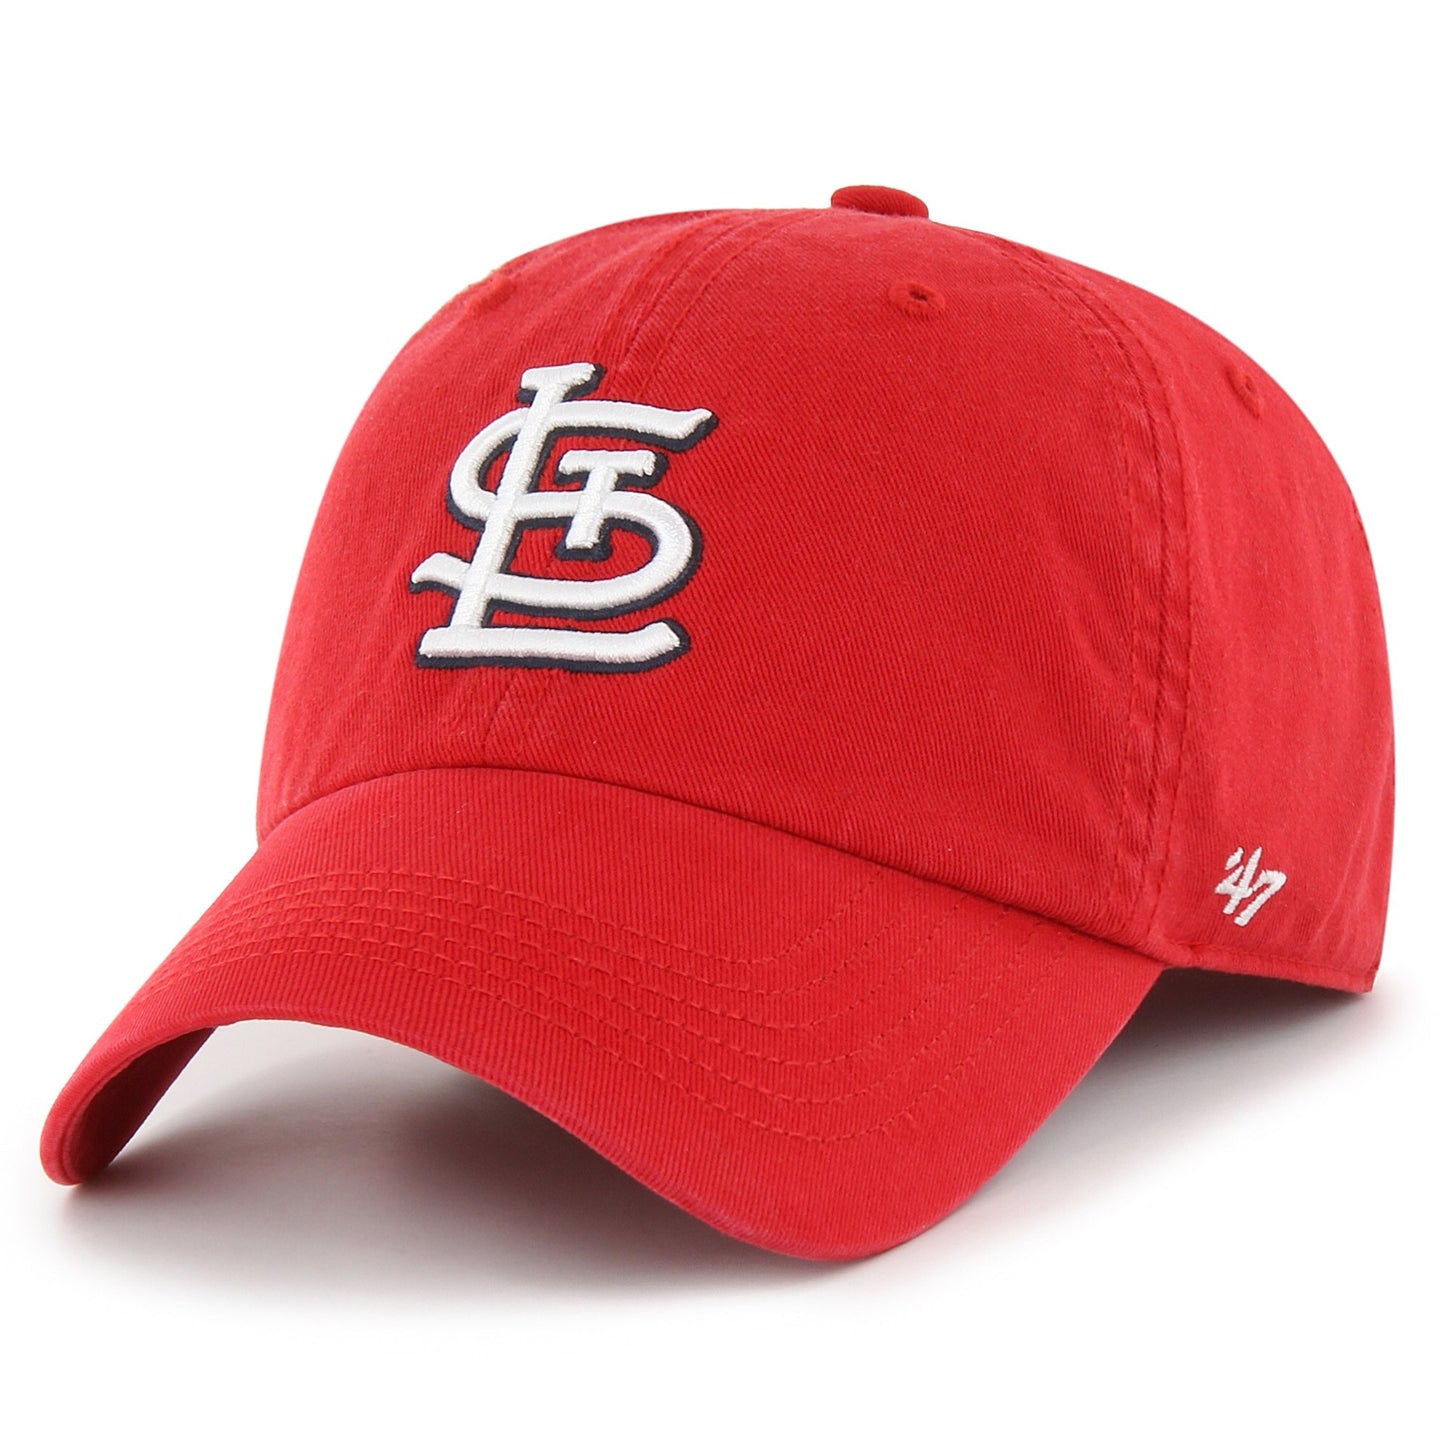 St. Louis Cardinals '47 Franchise Logo Fitted Hat - Red